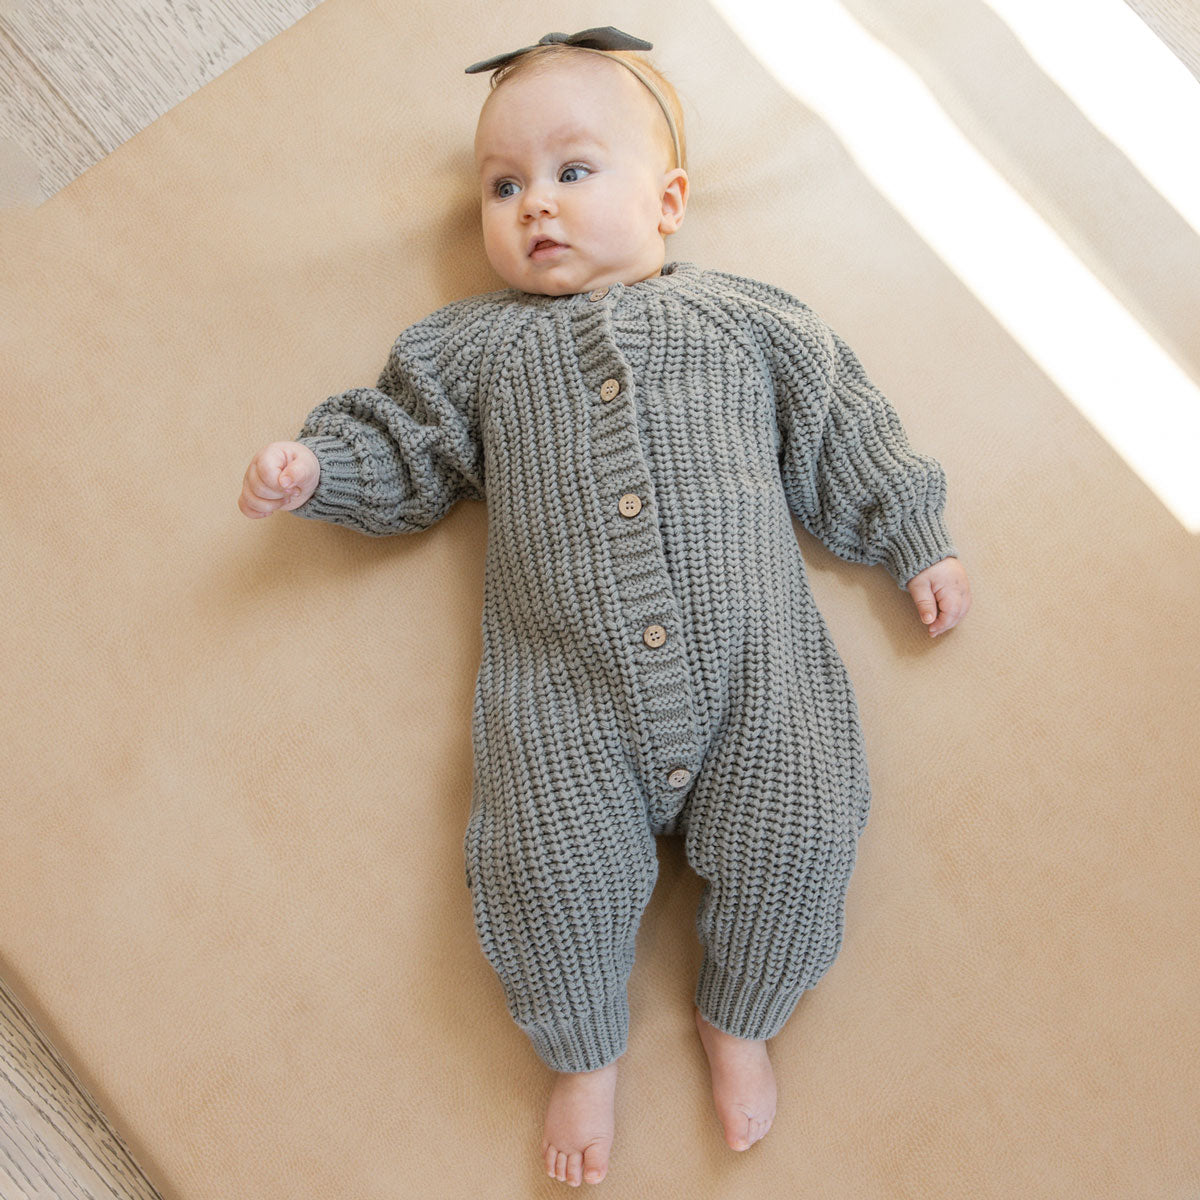 Baby wearing Quincy Mae Chunky Knit Jumpsuit - Basil